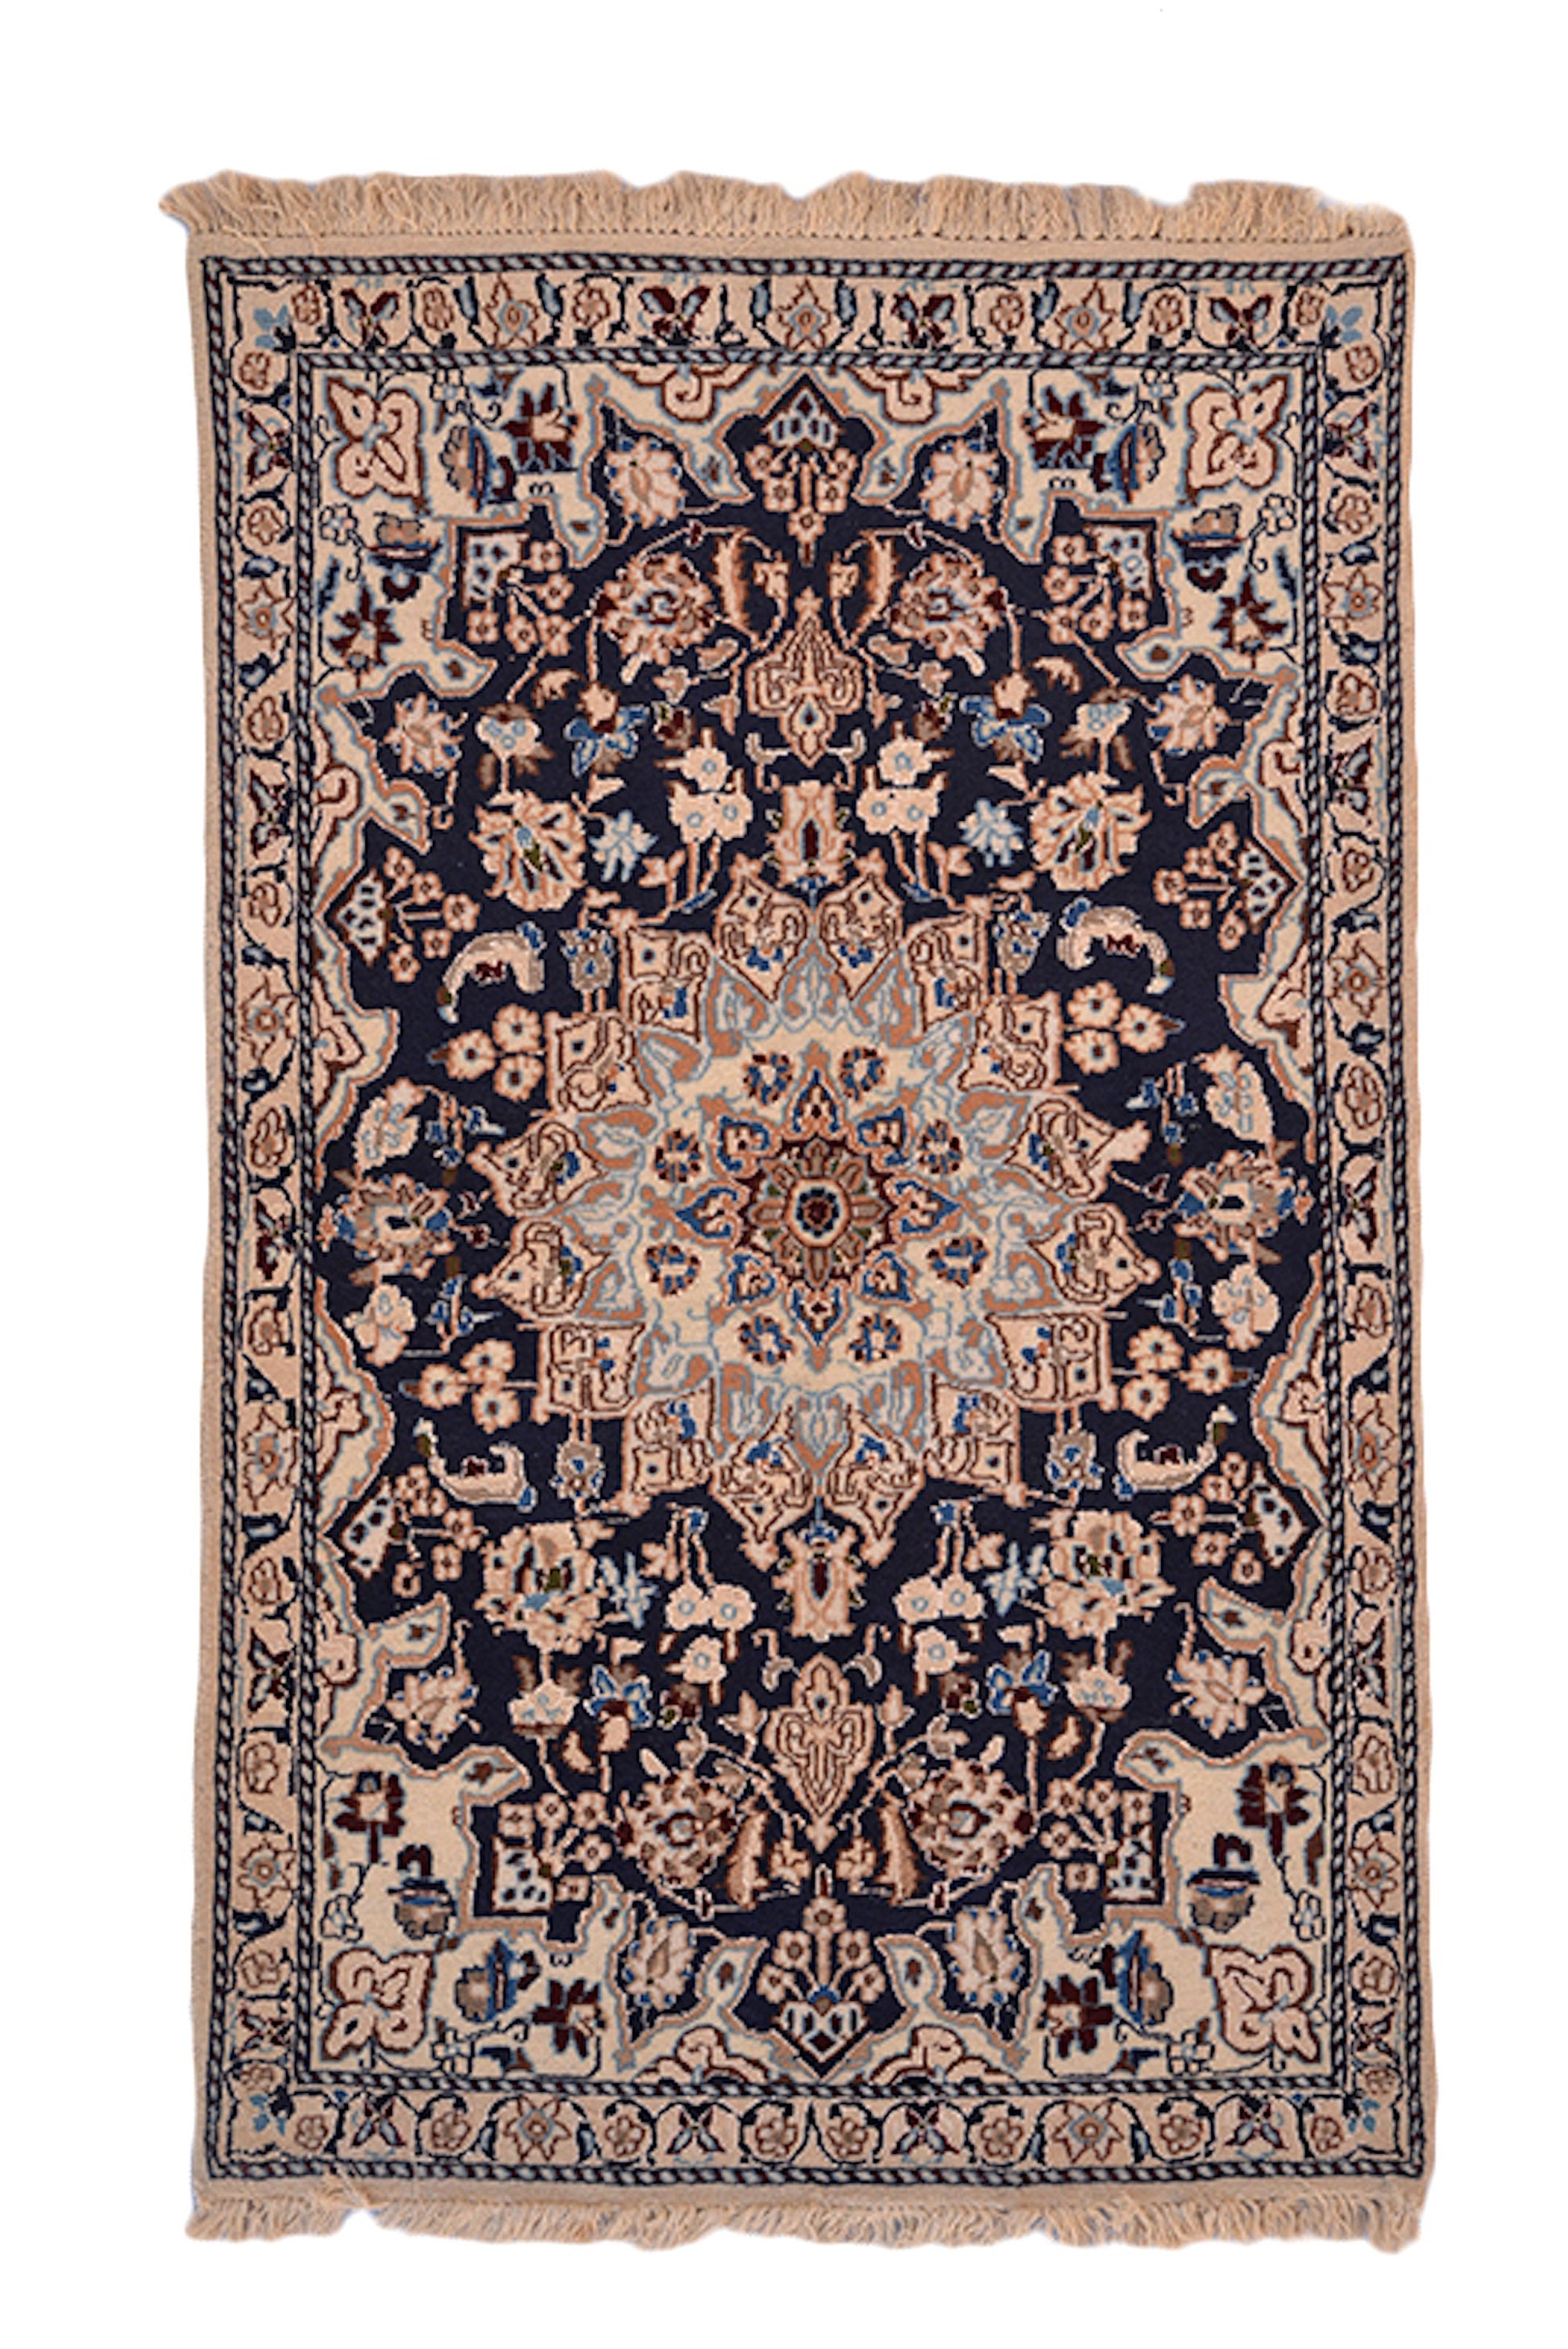 One of a kind Blue Beige Antique Rug | 3 x 5 Persian Caucasian Rug | Living Room Rug | Accent Handmade Rug | Oriental Floral Pattern Rug